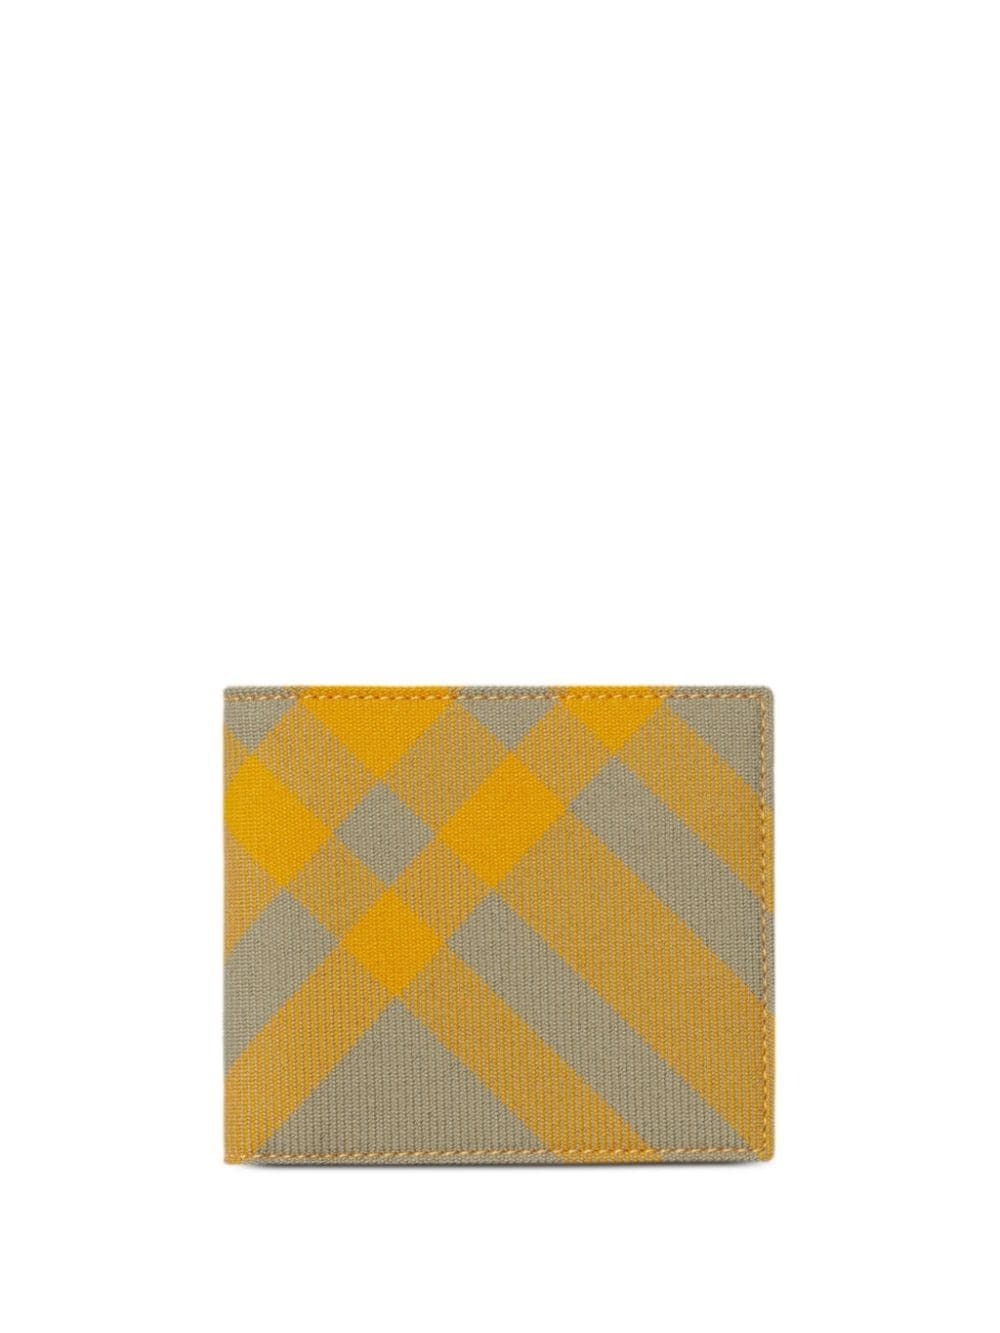 BURBERRY - Checked Wallet